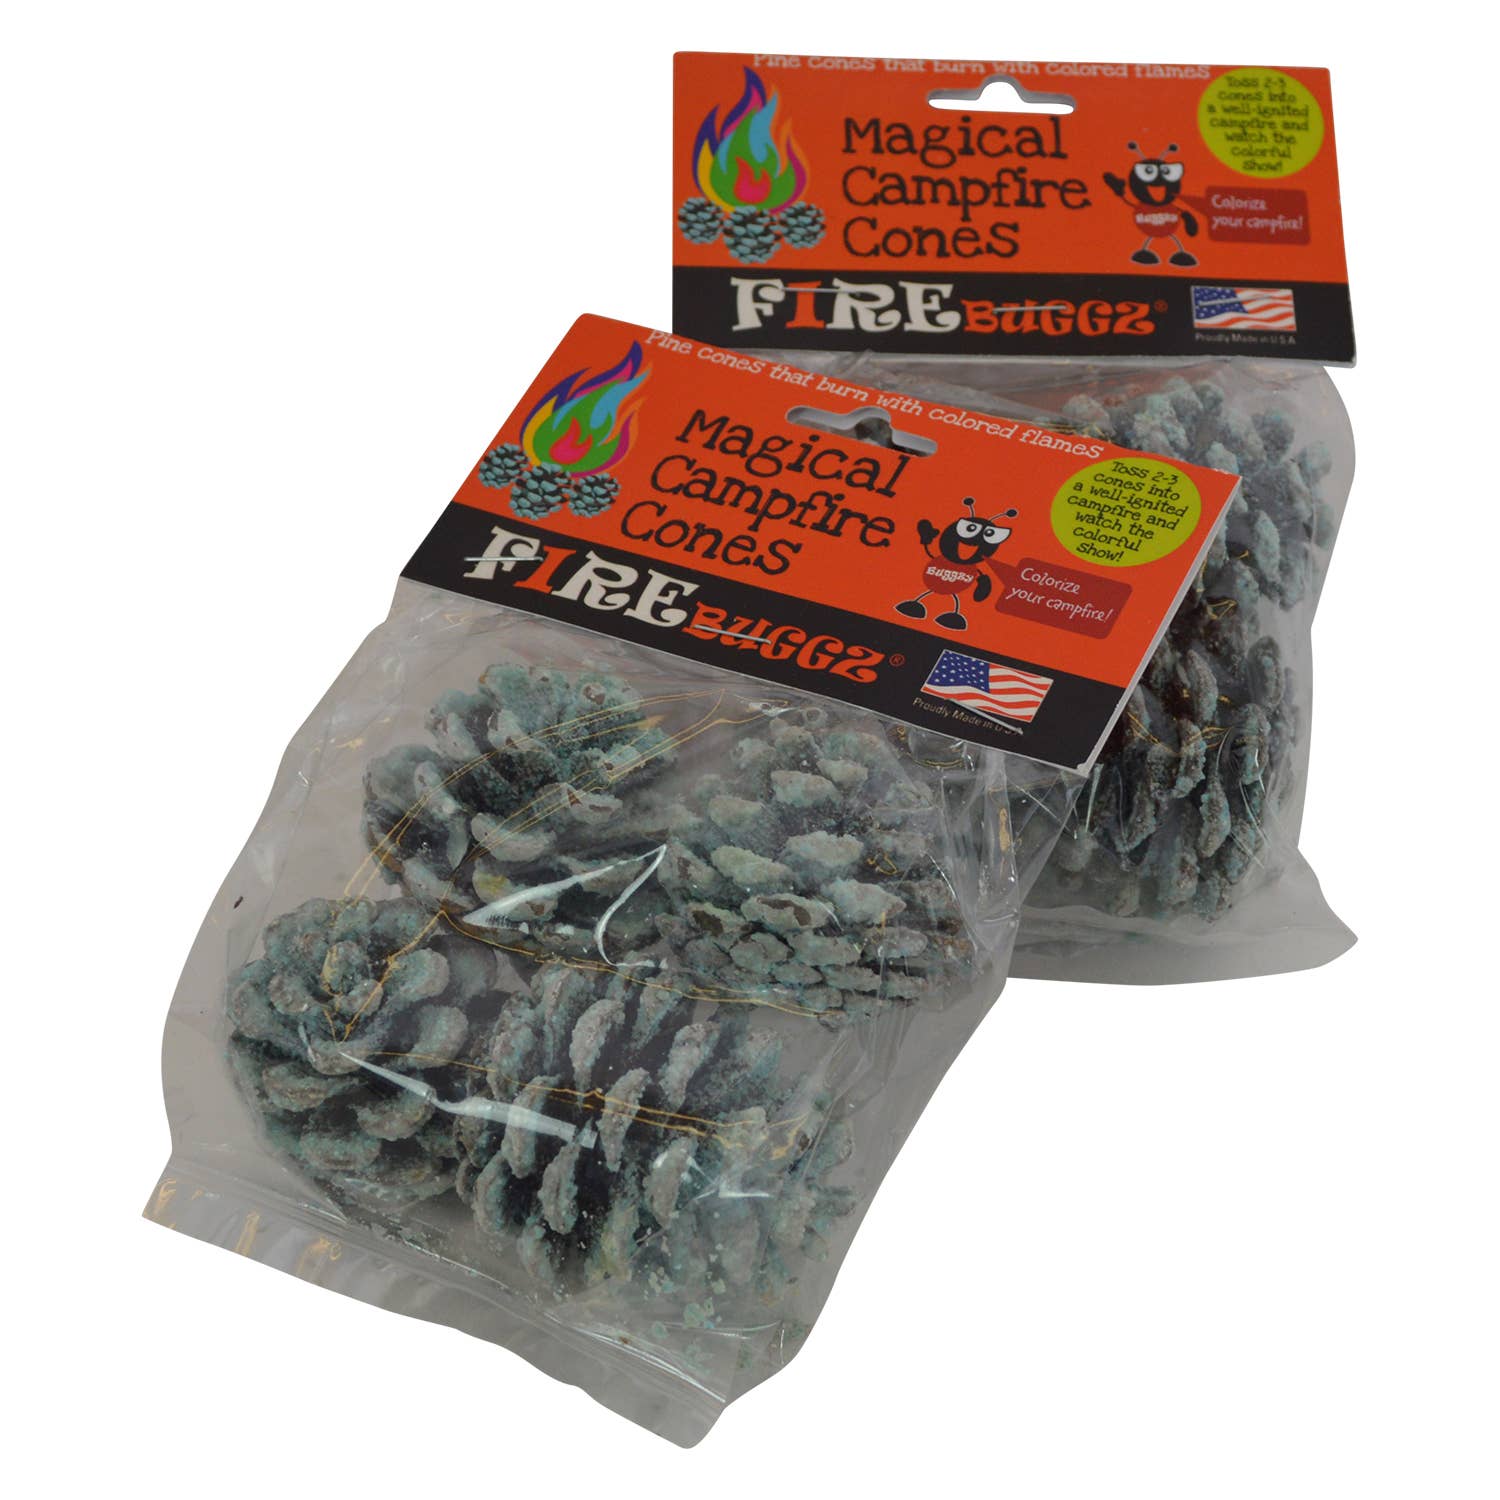 Two packages of Magical Campfire Cones, containing colored pine cones for creating vibrant flames in a campfire, made in Wisconsin.